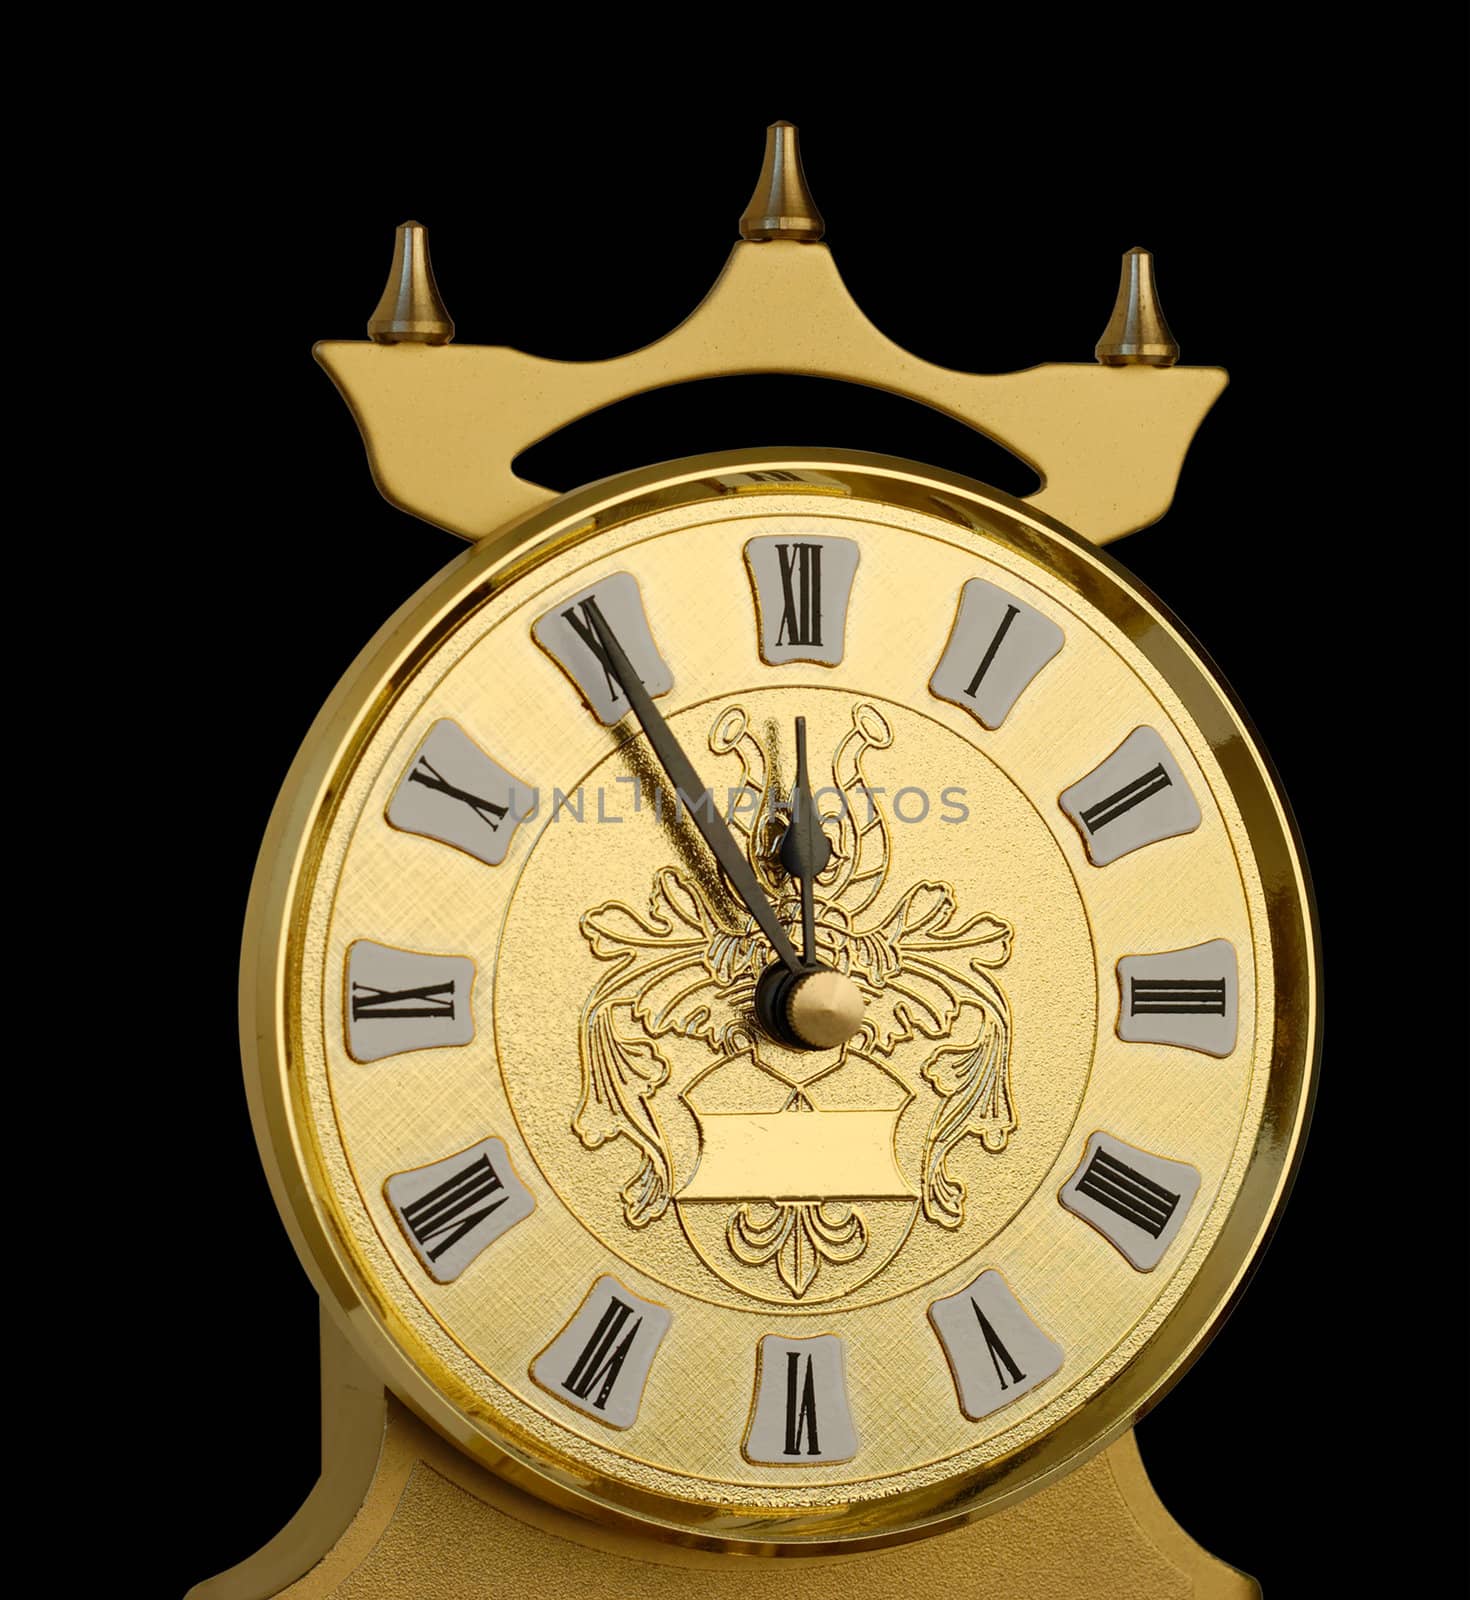 Clock dial showing five minutes to twelve. New Year coming soon! Clipping path included.
